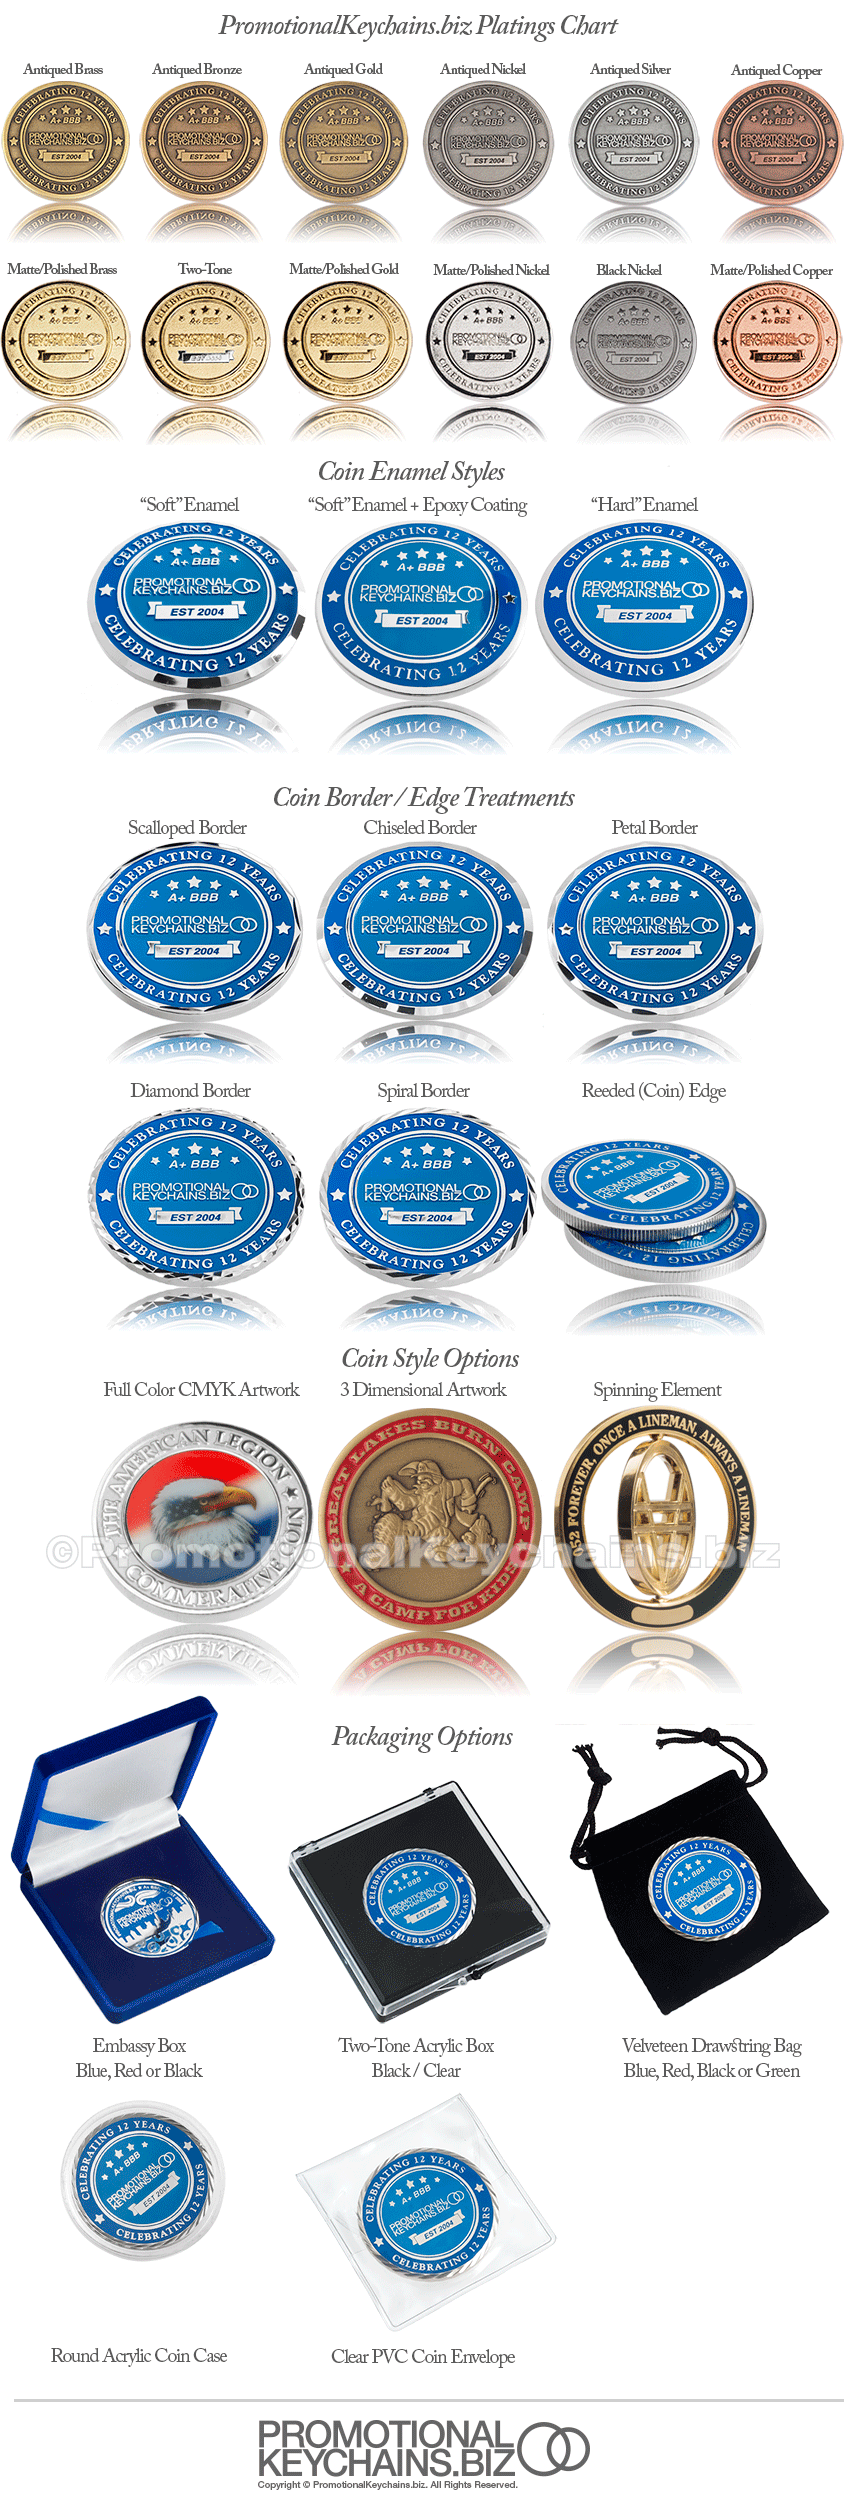 Large image showing the variety of customization options for creating custom coins